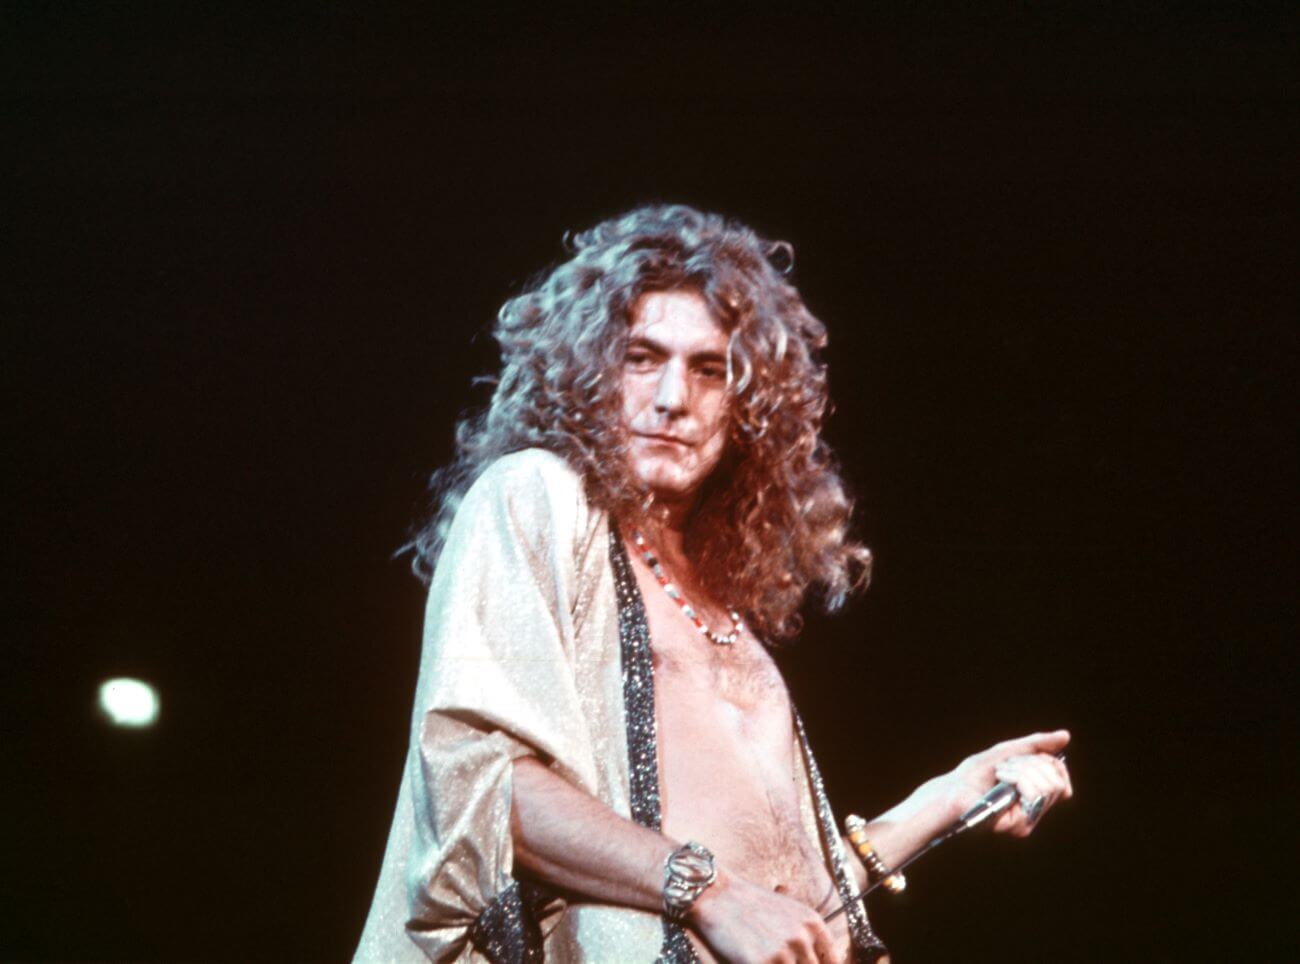 Robert Plant wears a necklace and holds a microphone.